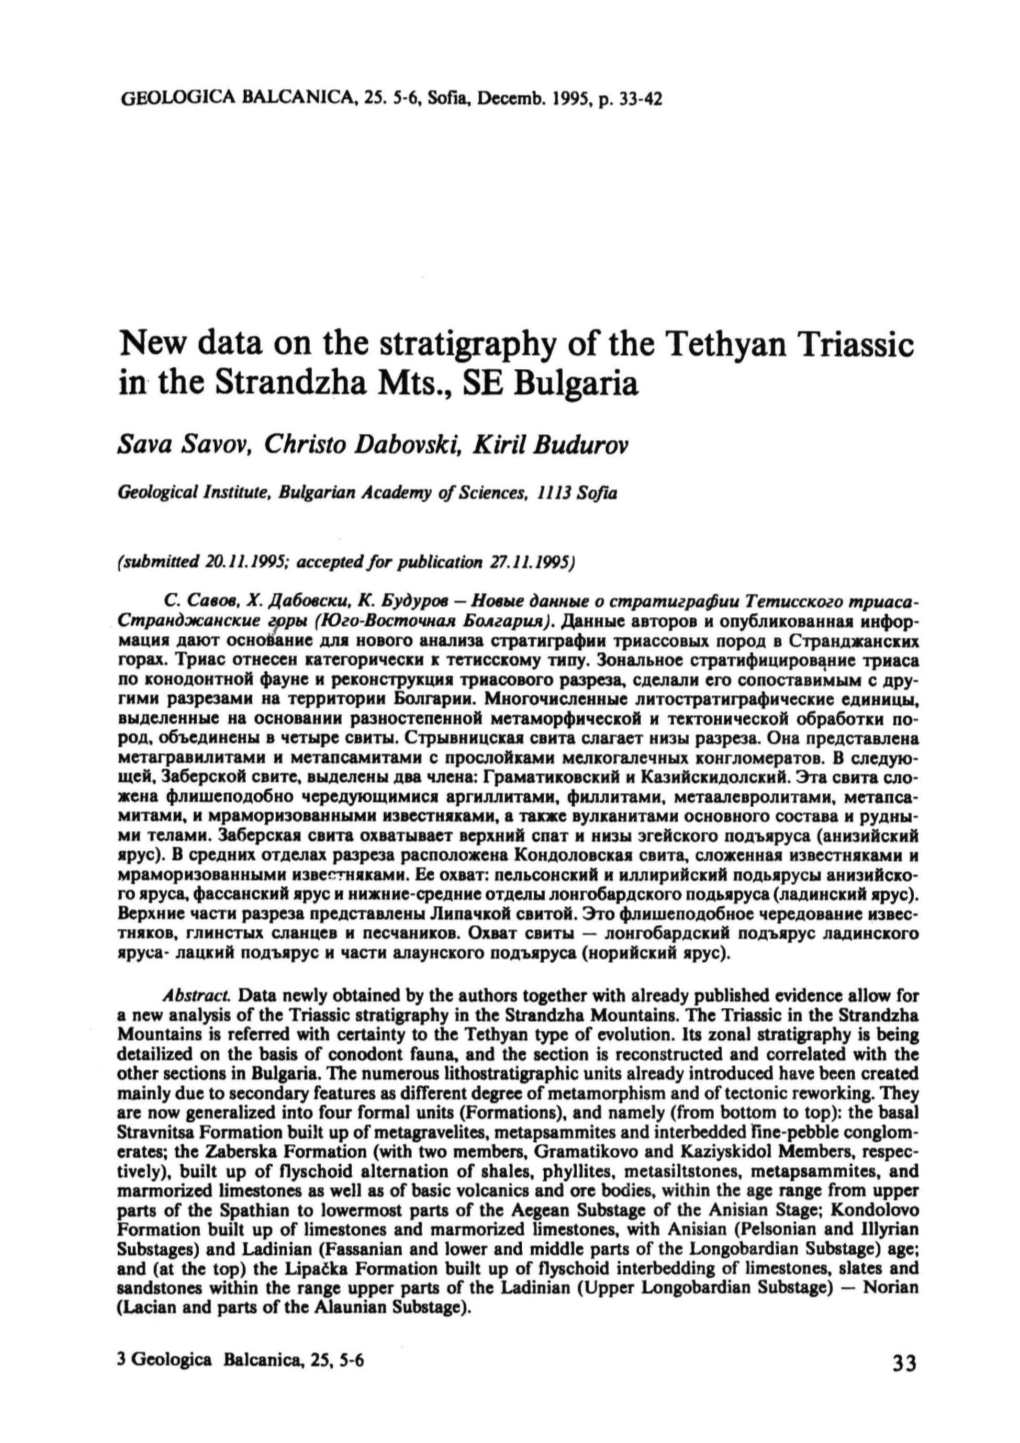 New Data on the Stratigraphy of the Tethyan Triassic in the Strandzha Mts., SE Bulgaria